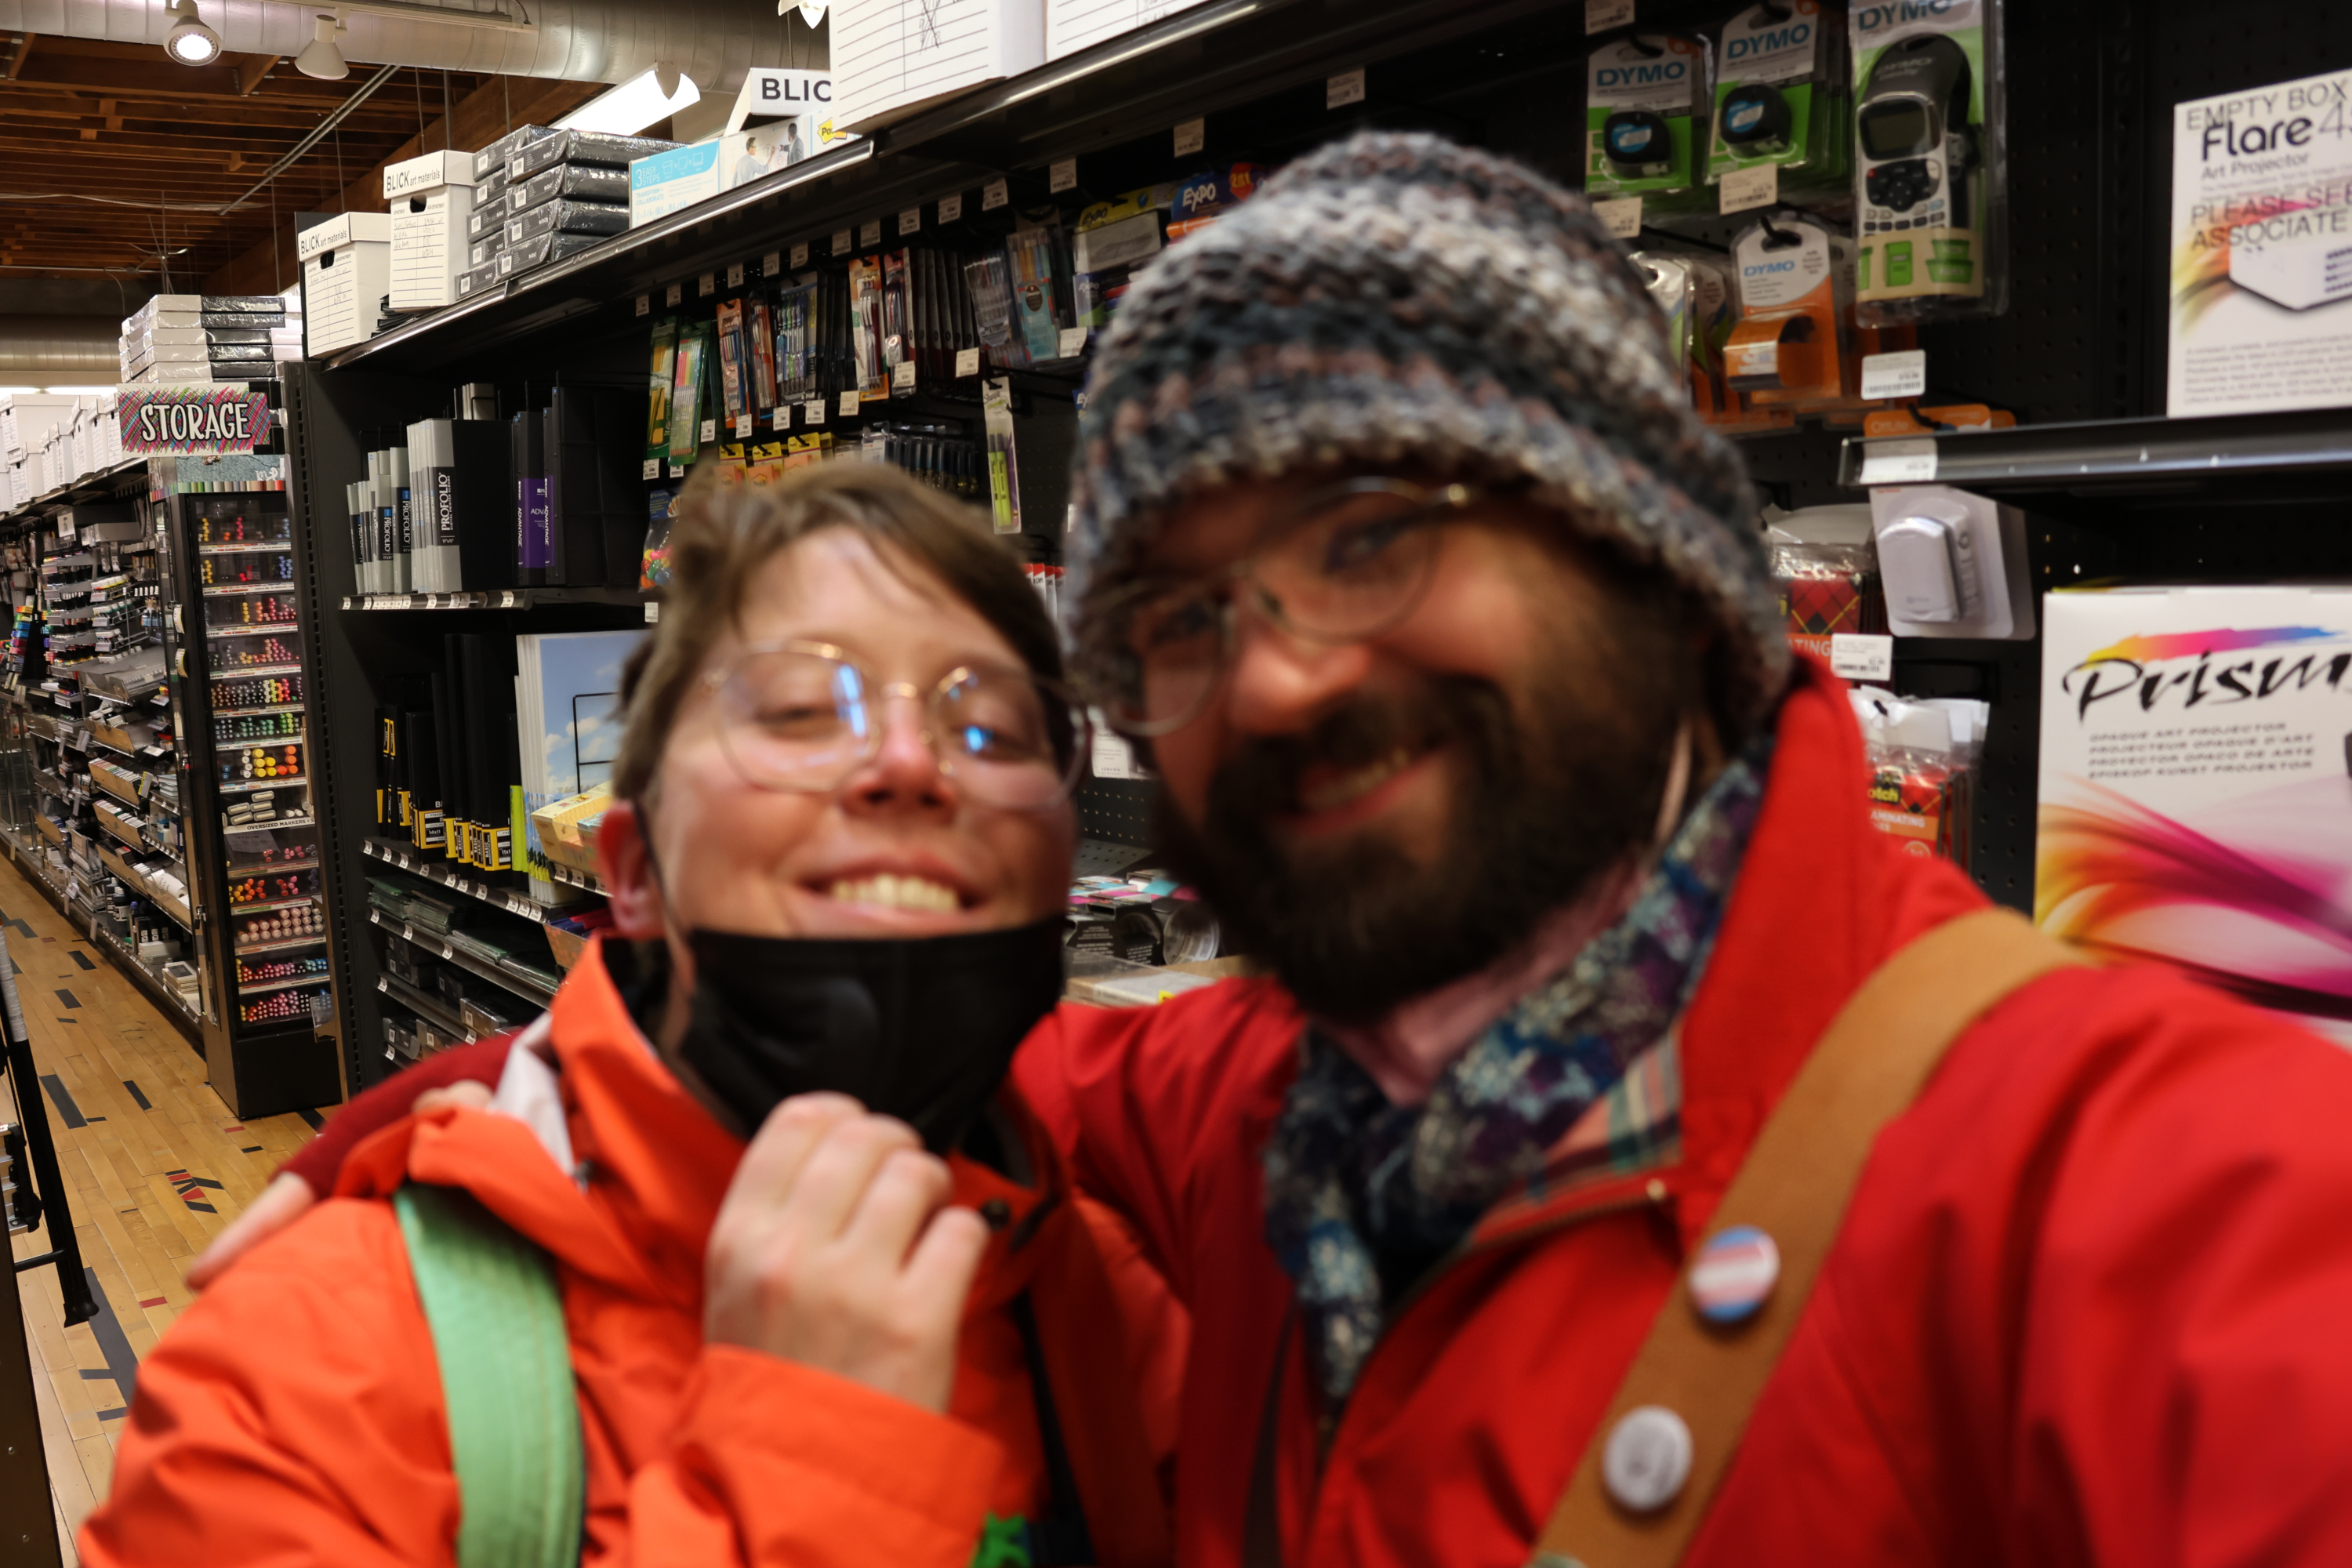 A long store aisle, shelves filled with art supplies, is in crisp focus in the background. In the foreground are Morrie and I bundled up for cold weather, pulling our masks down for a quick selfie together